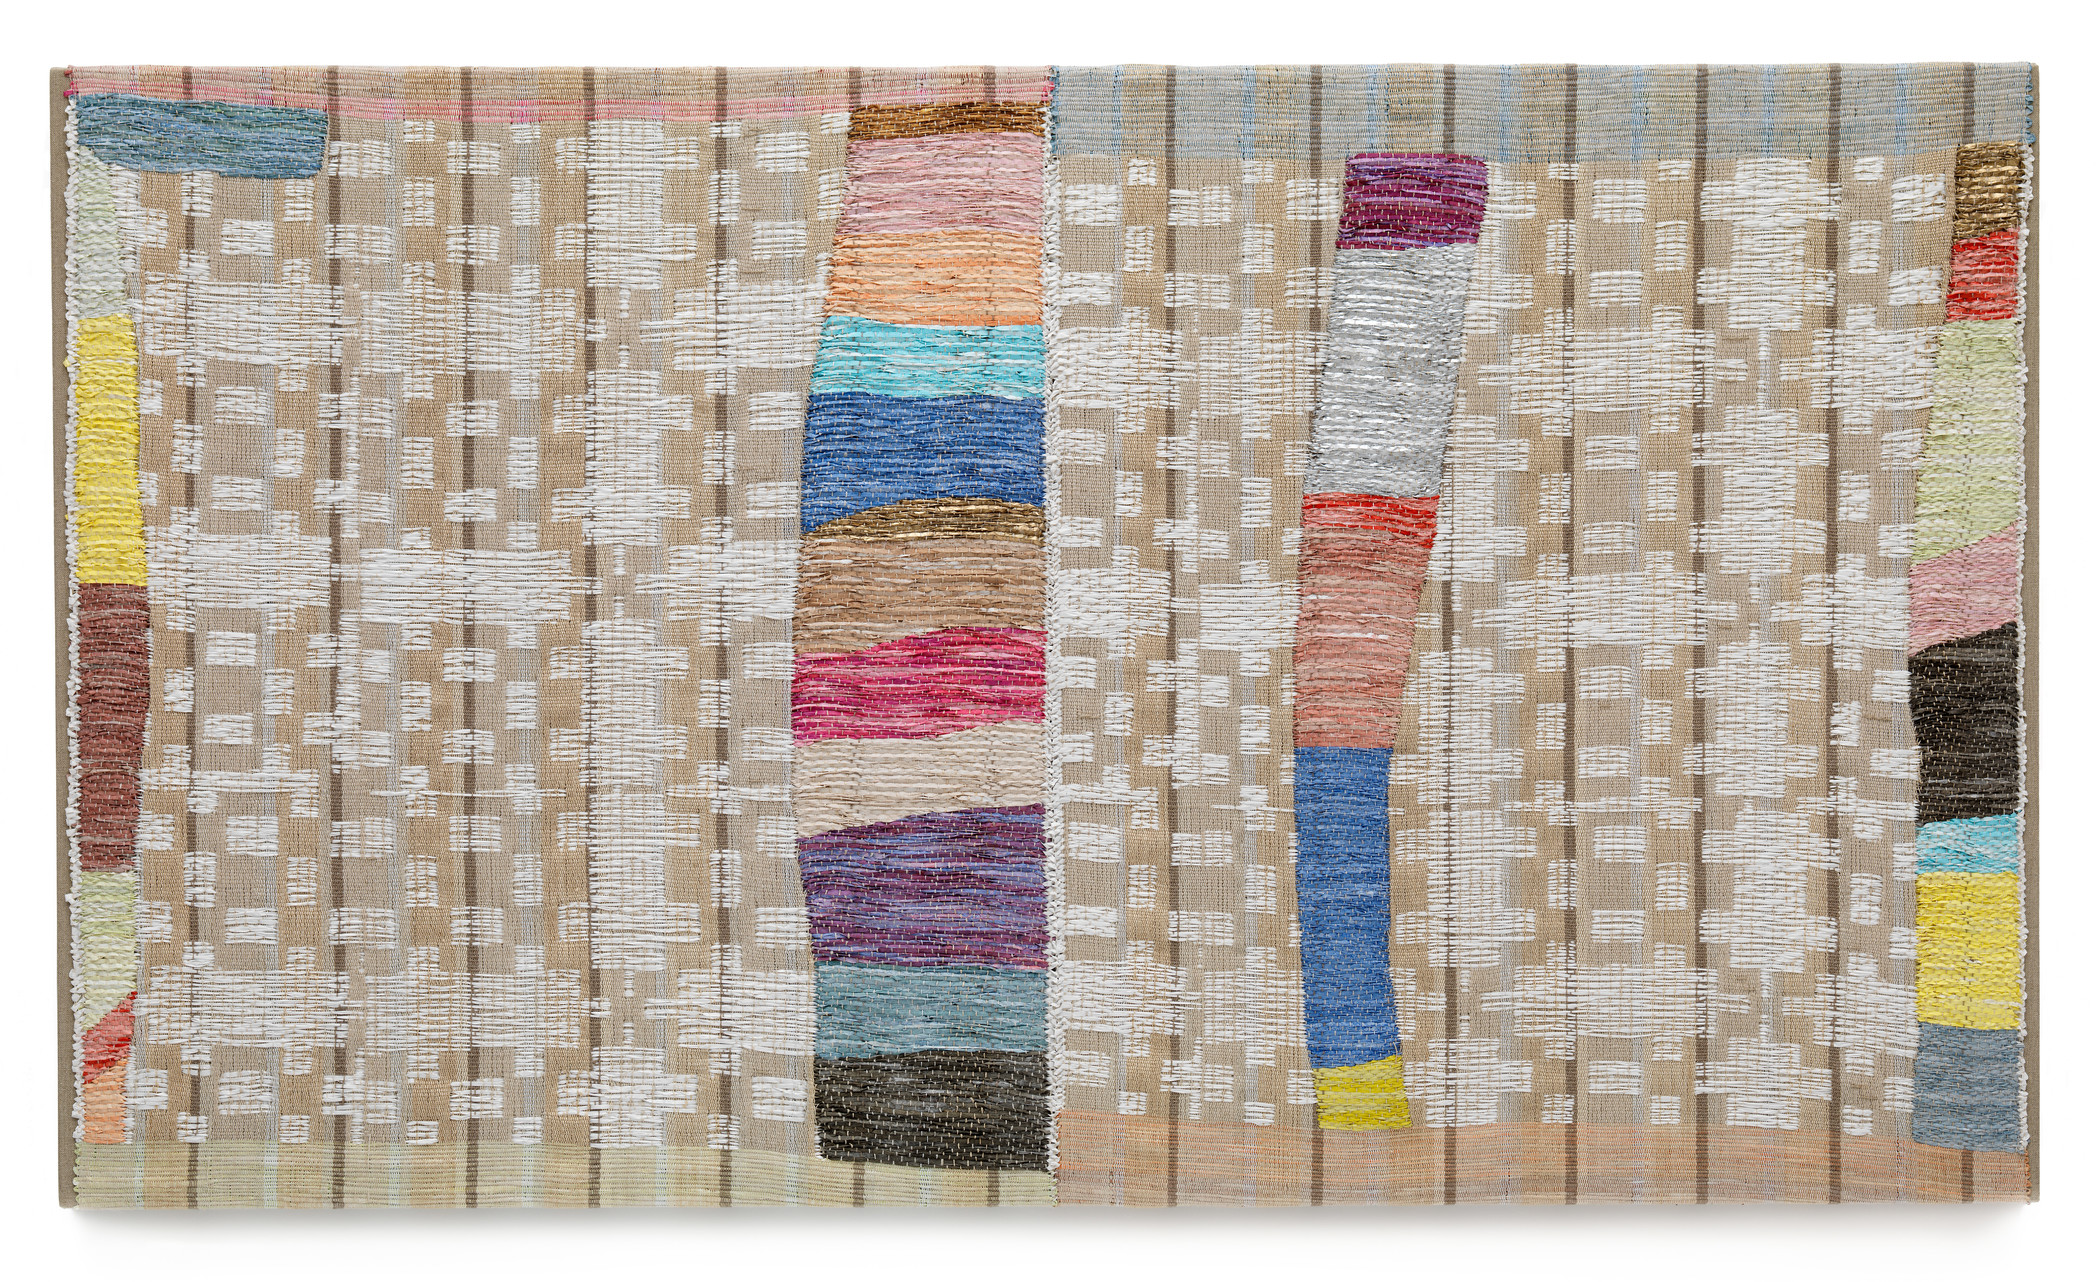 Christy Matson, Overshot Variation 3, 2019, Los Angeles County Museum of Art, gift of the 2019 Decorative Arts and Design Acquisitions Committee (DA²), photo © Museum Associates/LACMA 